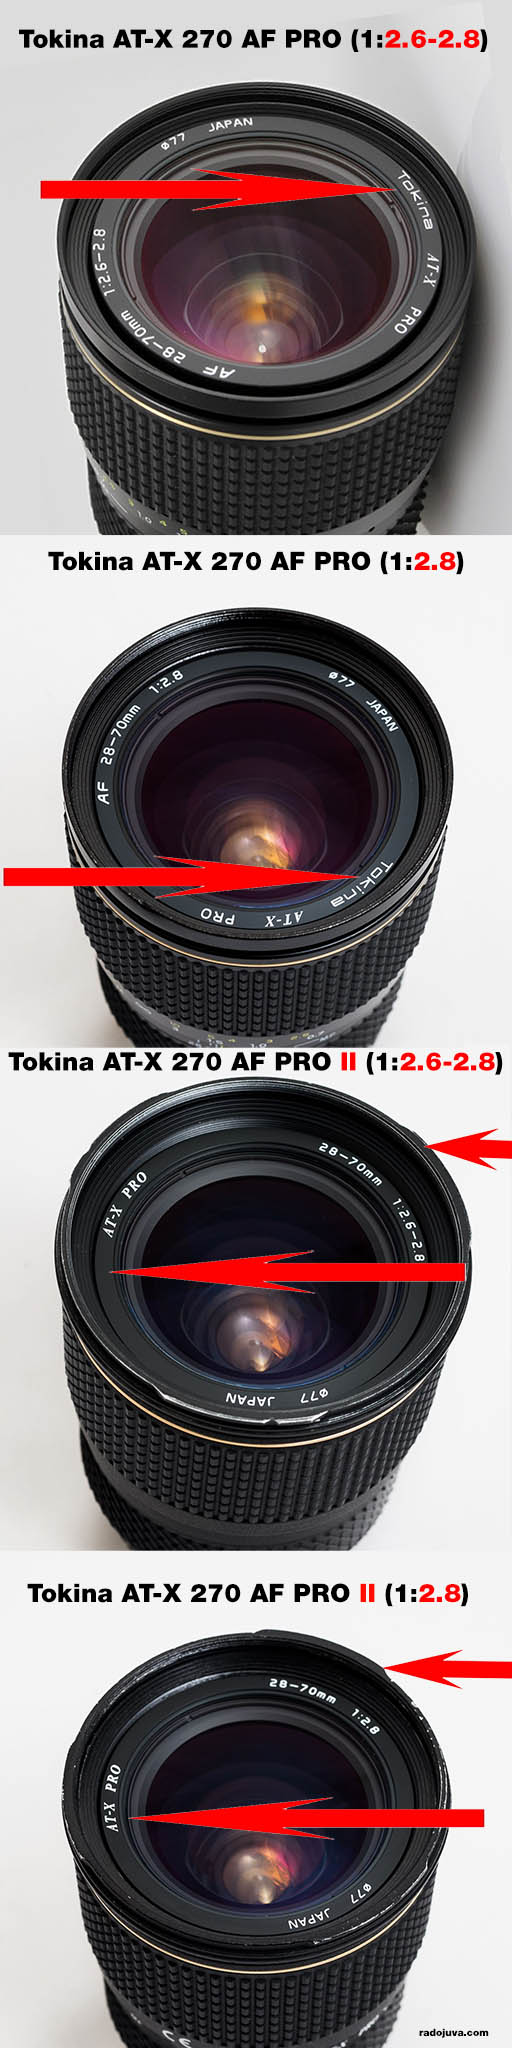 Station wagon Tokina AT-X PRO 28-80 1: 2.8 Aspherical review | Happy